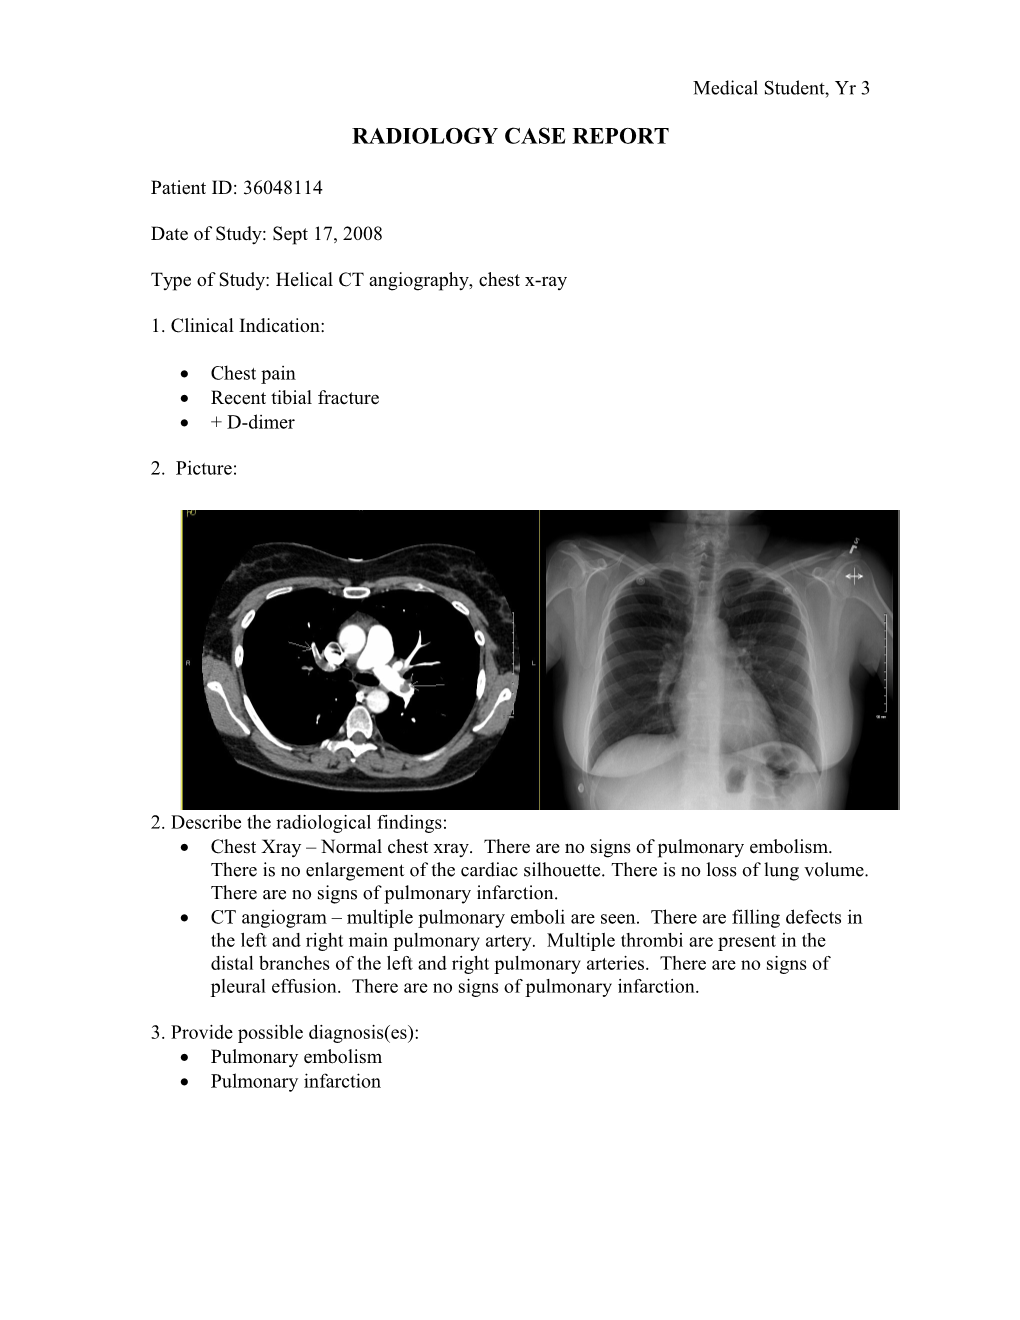 Radiology Case Report s2